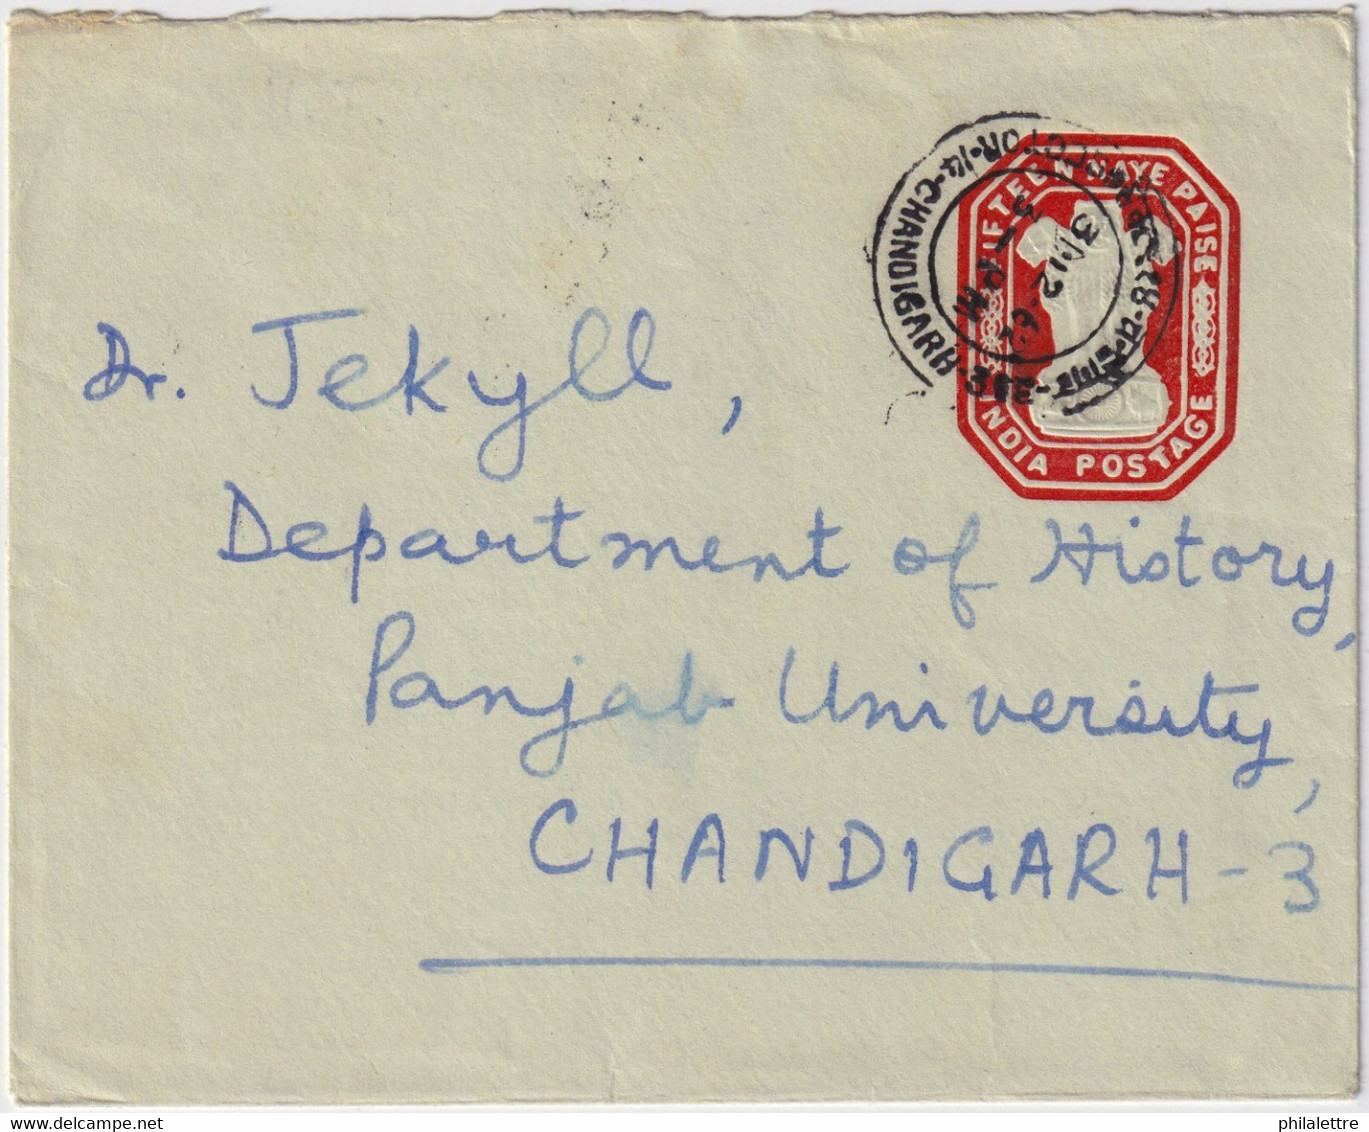 INDE / INDIA - 1962 - Fine Postal Envelope Used Locally In CHANDIGARH - Enveloppes